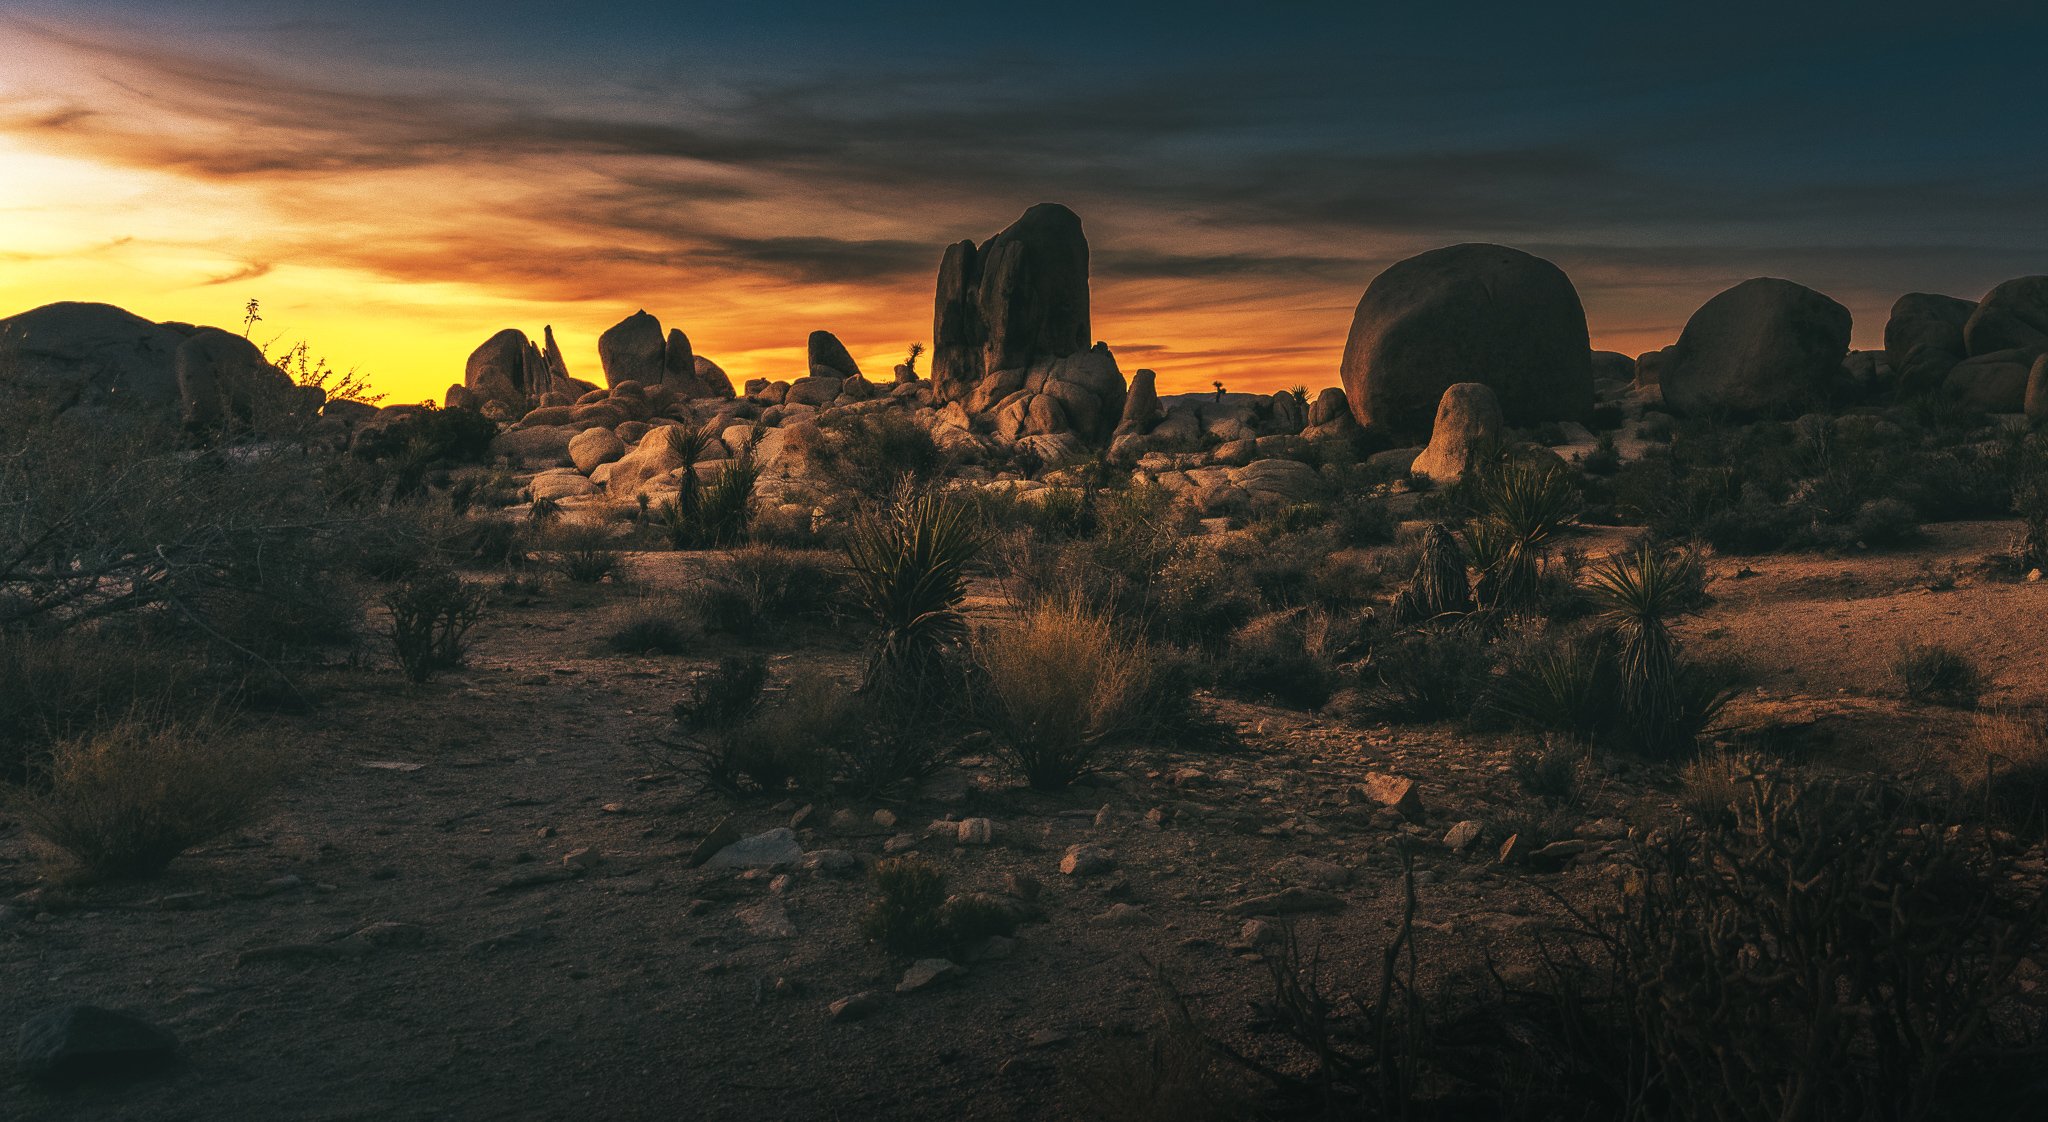 I've been playing around with some different editing styles lately.  I particularly like this matte, cinematic kind of look.  It doesn't hurt that Joshua Tree looks like something straight out of a Spaghetti Western.

#johsuatree #spaghettiwestern #r